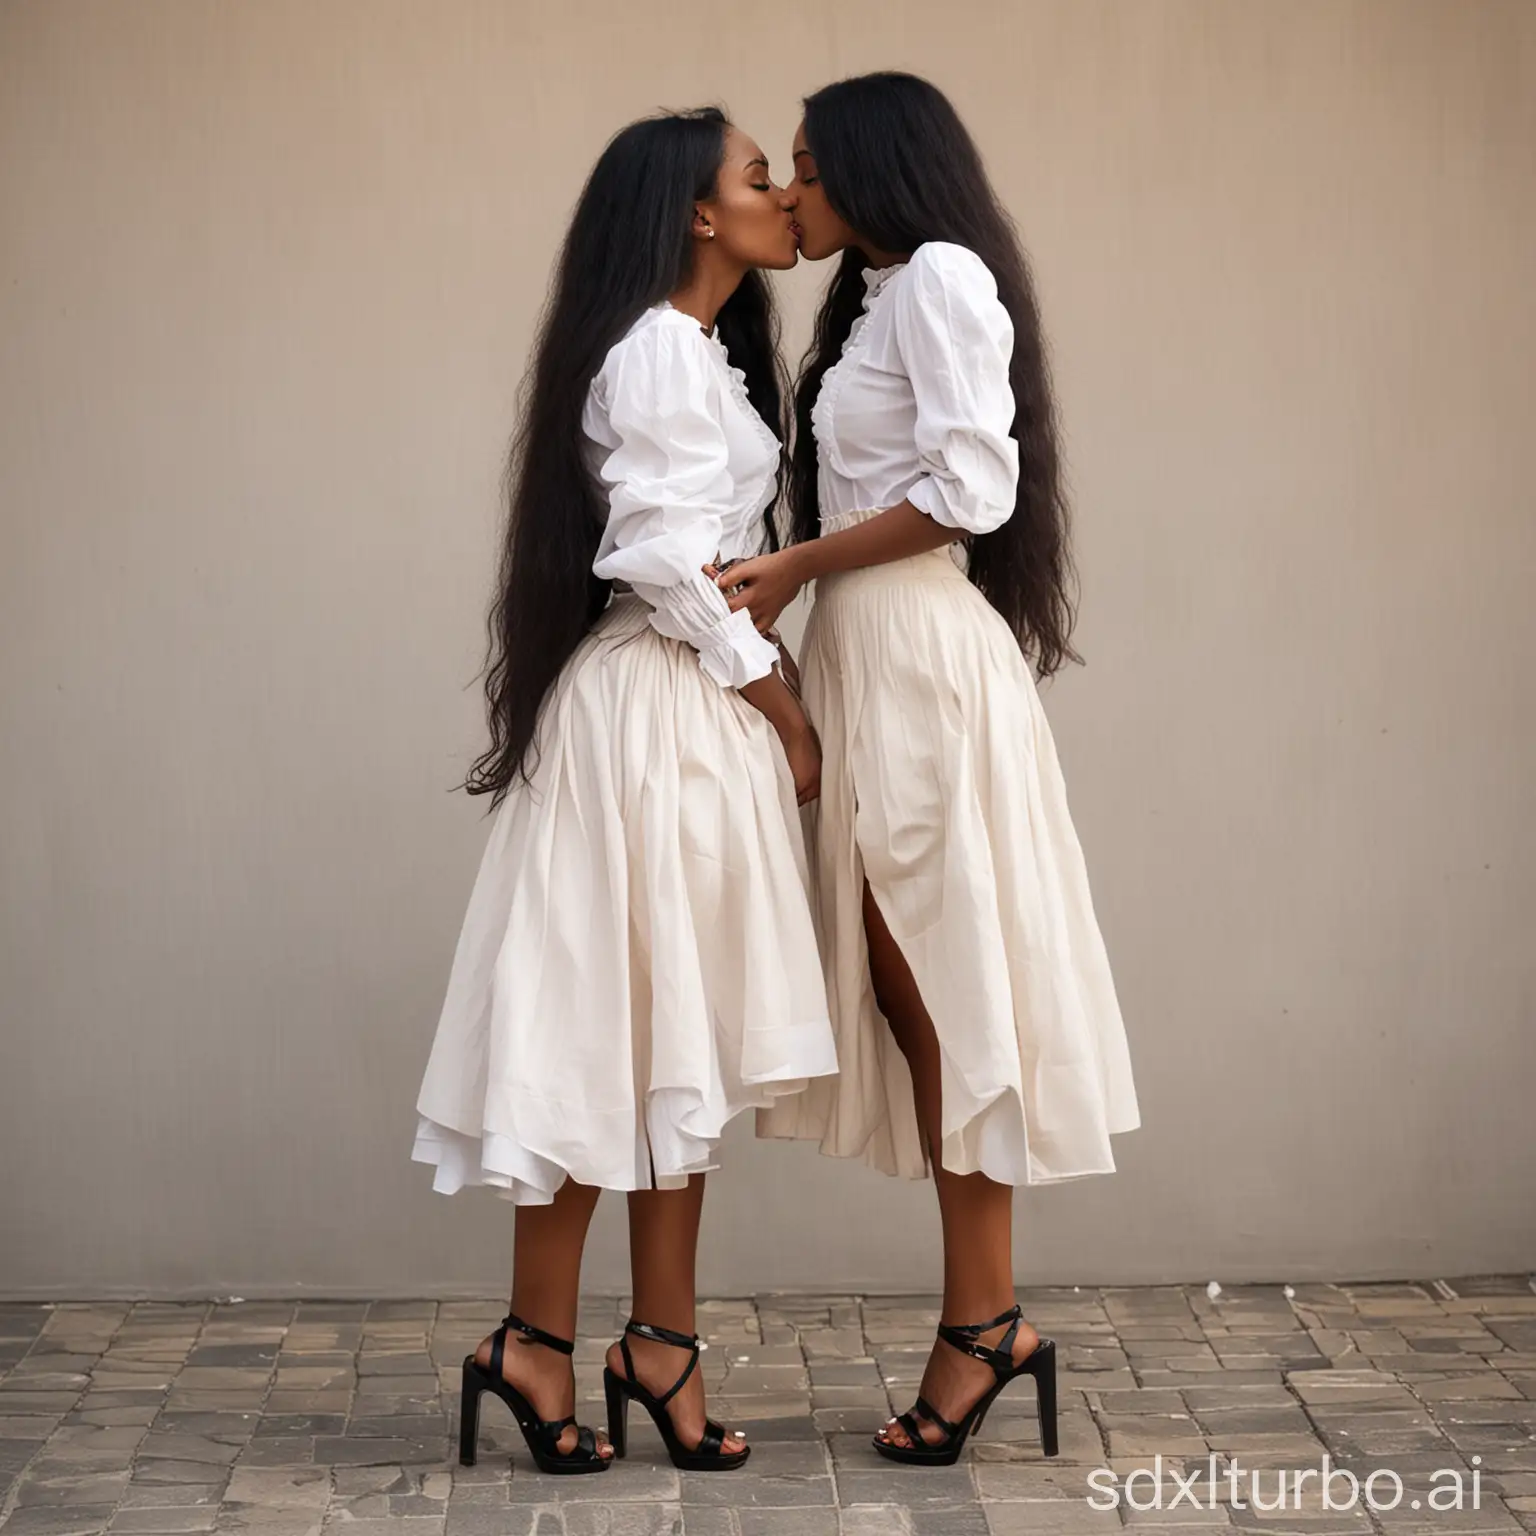 two black woman long hair   wears  tigth  blouse , wears  tigth long  skirt  , wears  extreme hig heels plataform sandals , they kiss.  